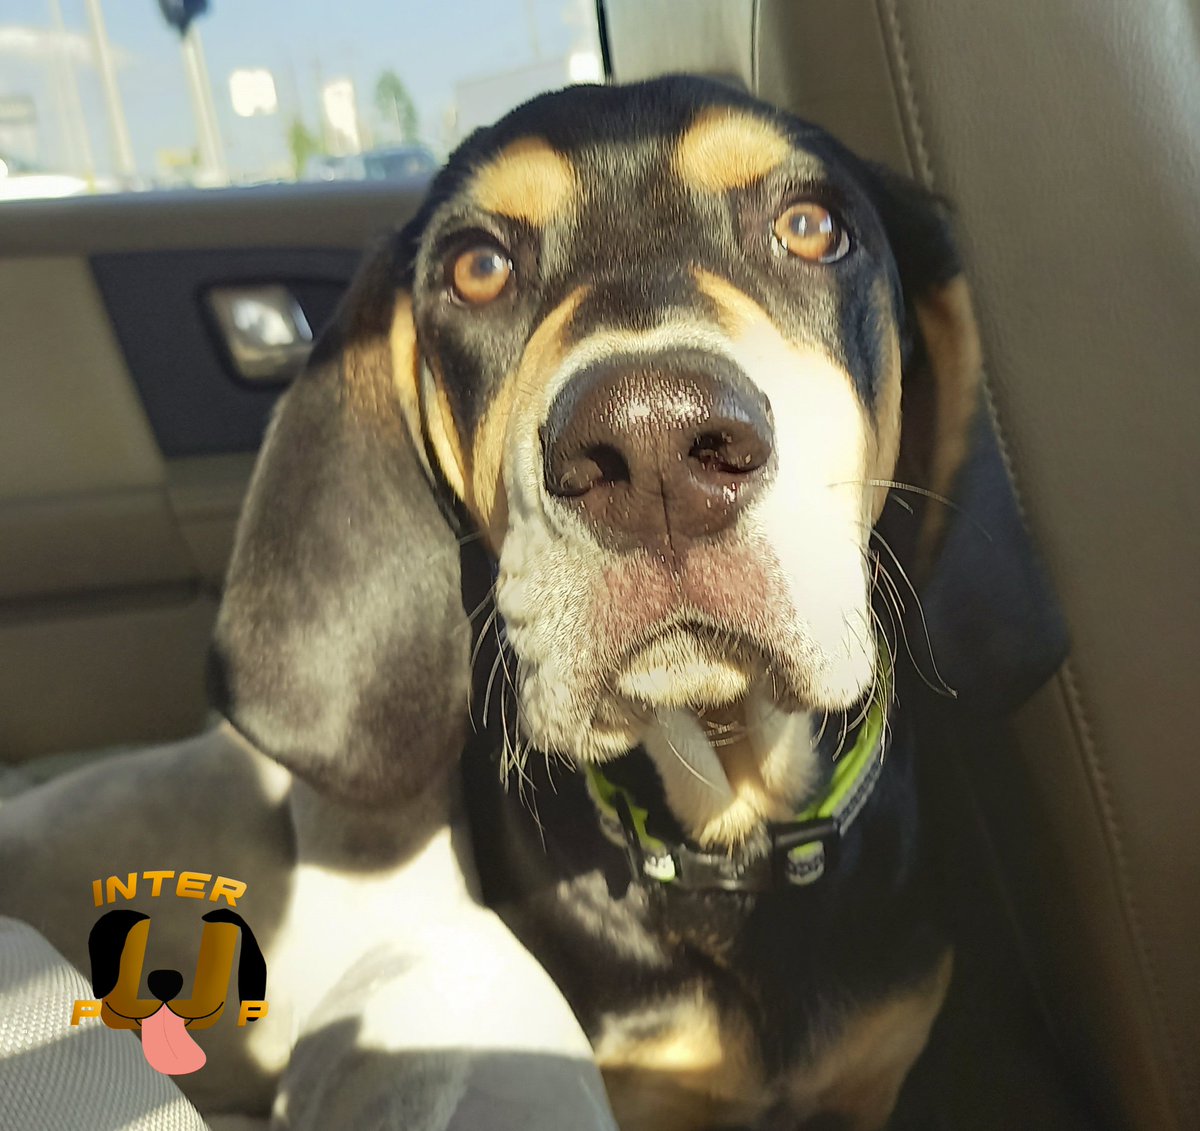 Someone's excited for our adventure | James Bean

#InterPup #JamesBean #Puppy #Pup #Dog #PuppyPictures #Beagle #Coonhound #BlackandTan #BlackandTanCoonhound #doggy #pet #mydog #doglover #pupper #bark #spoiled #dogstagram #dogsofinstagram #puppiesofinstagram #doglife #dogs